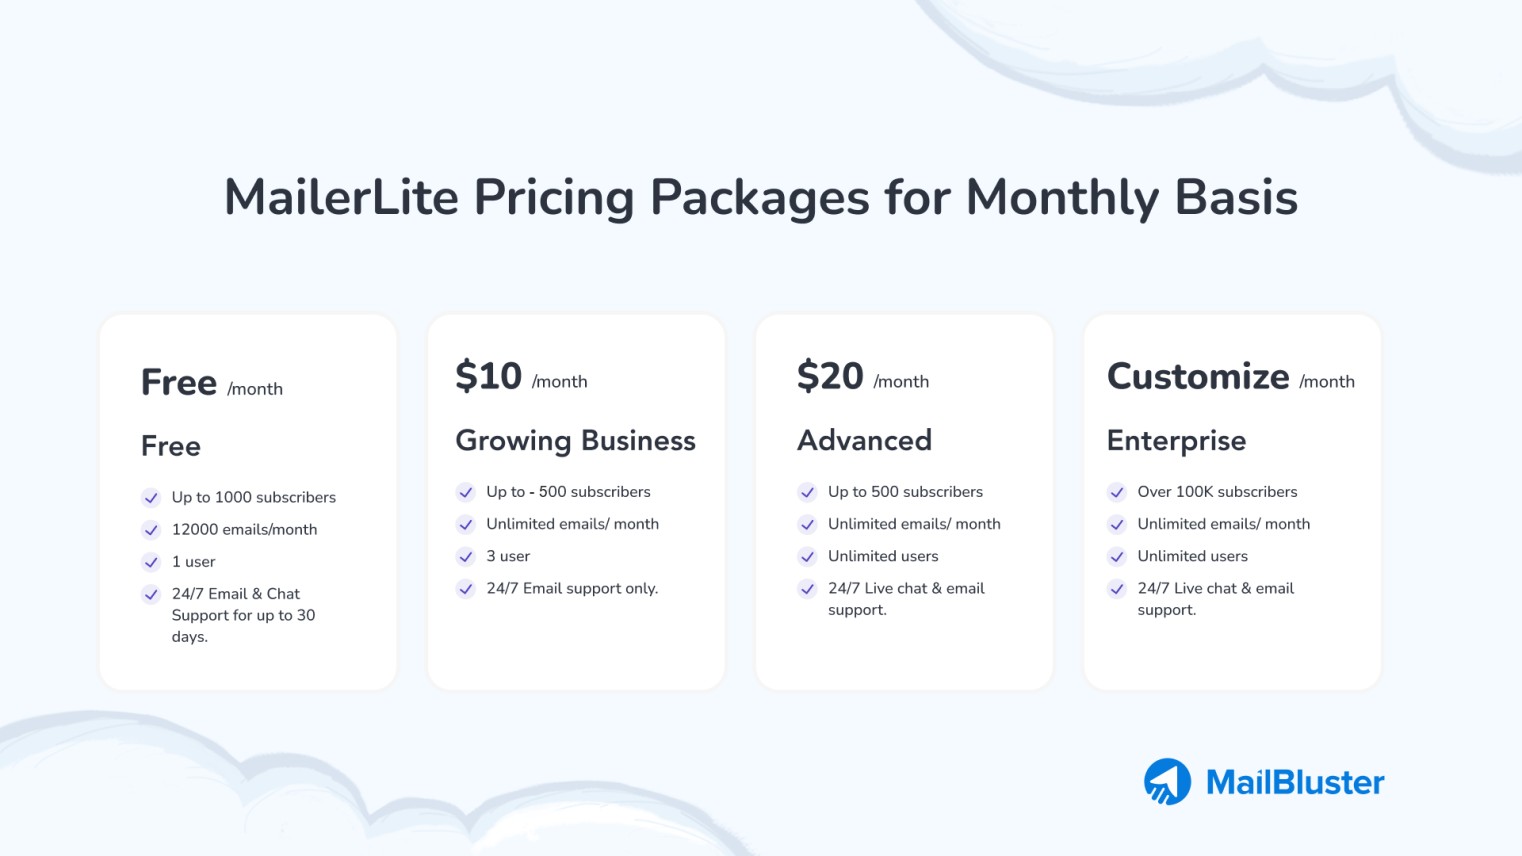 MailerLite pricing package for monthly basis.